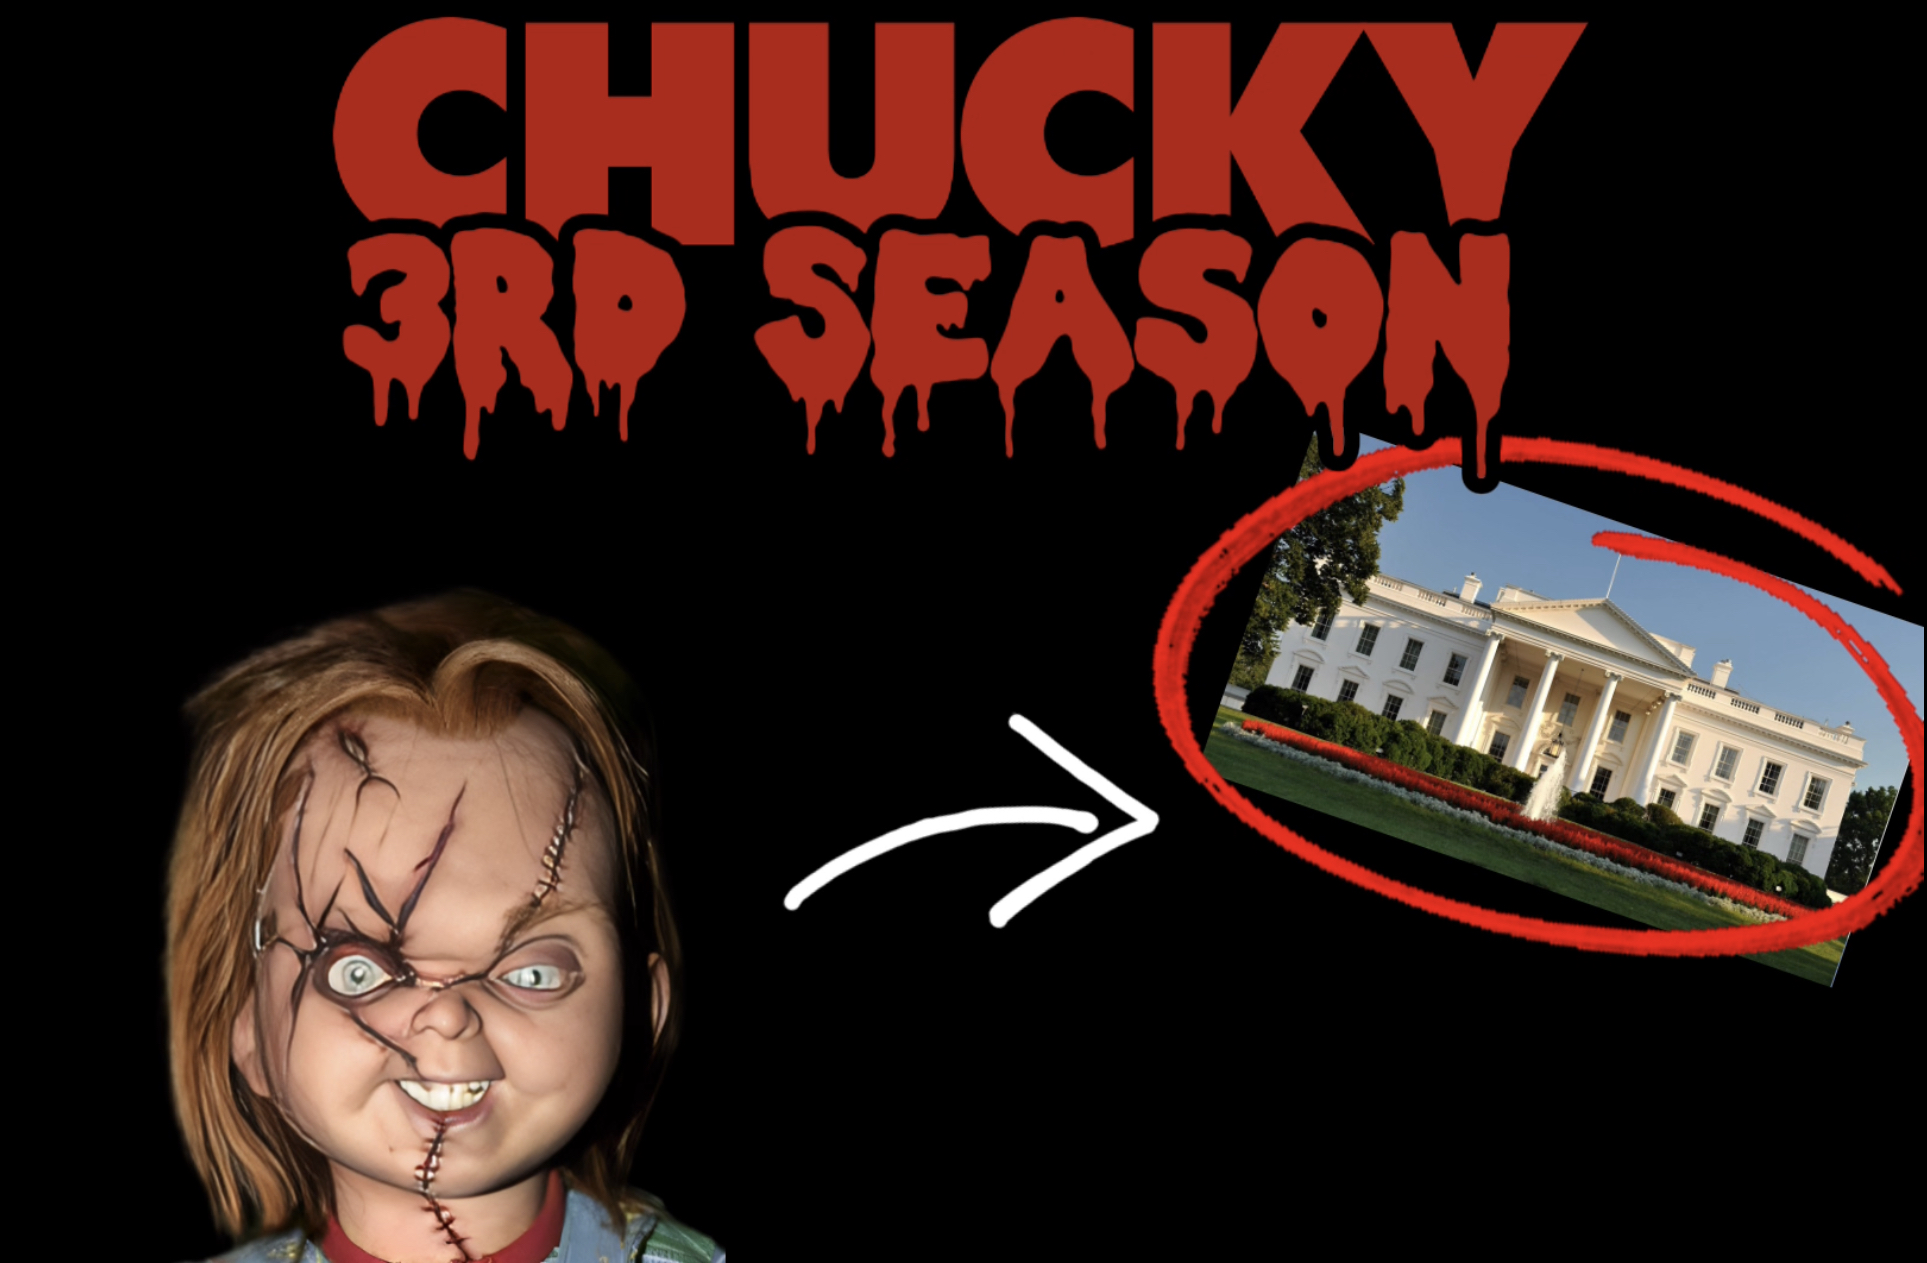 Chucky the Doll will be seen at the White House during the third season of the Chucky series. 